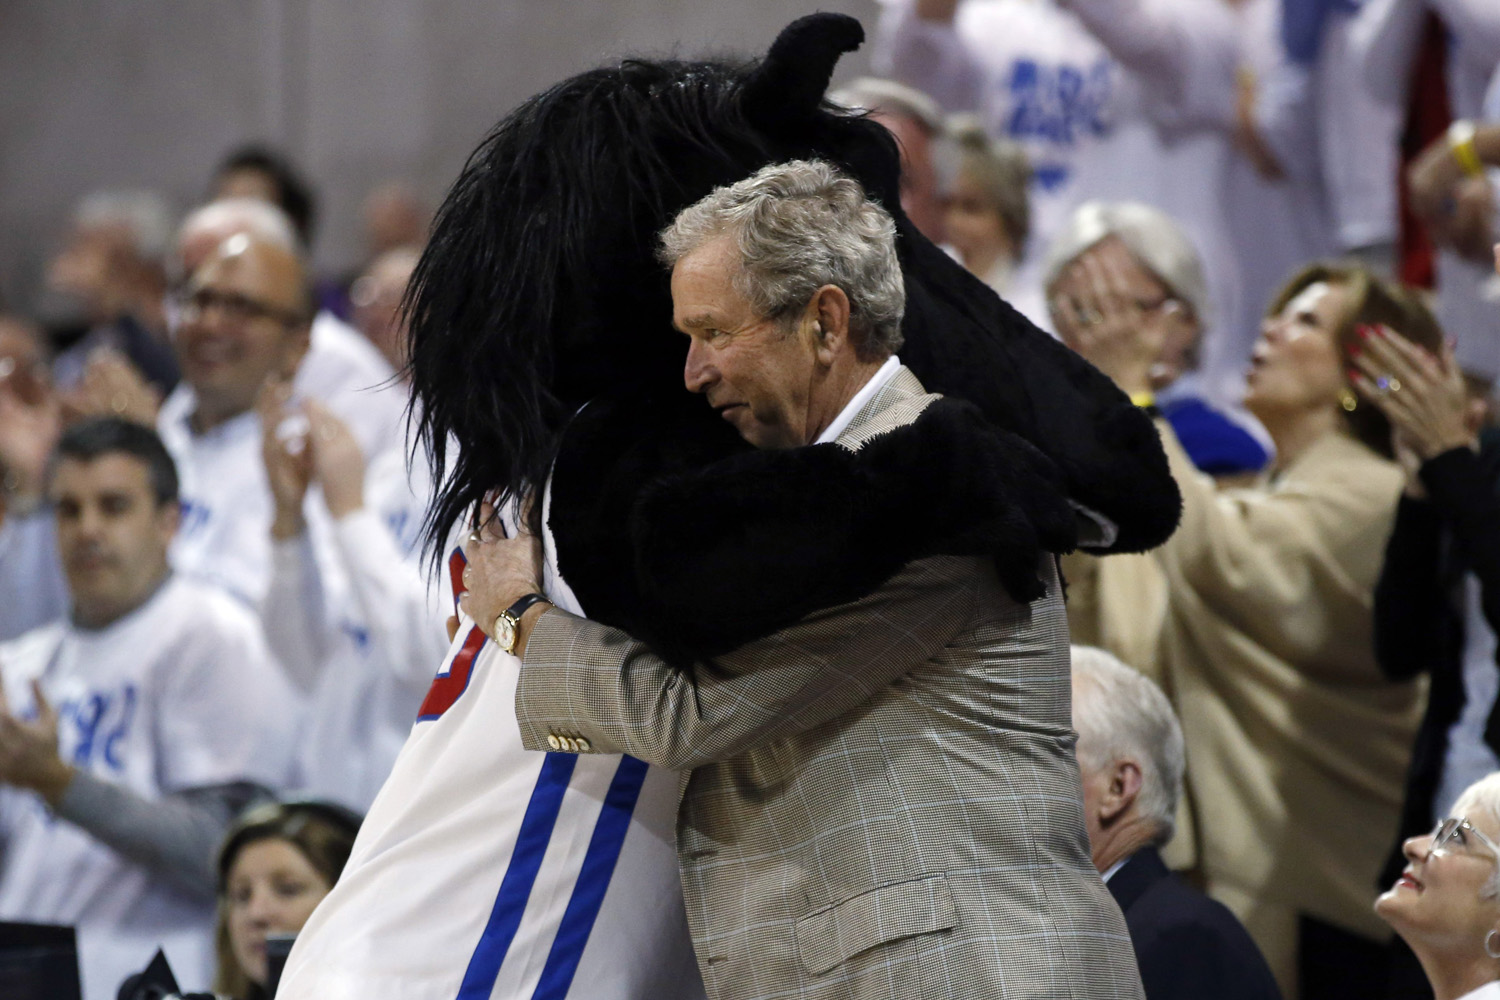 Mar. 5, 2014. Former President George W. Bush gets a hug from SMU mascot Peruna during a break in the first of an NCAA college basketball game between SMU and Louisville.